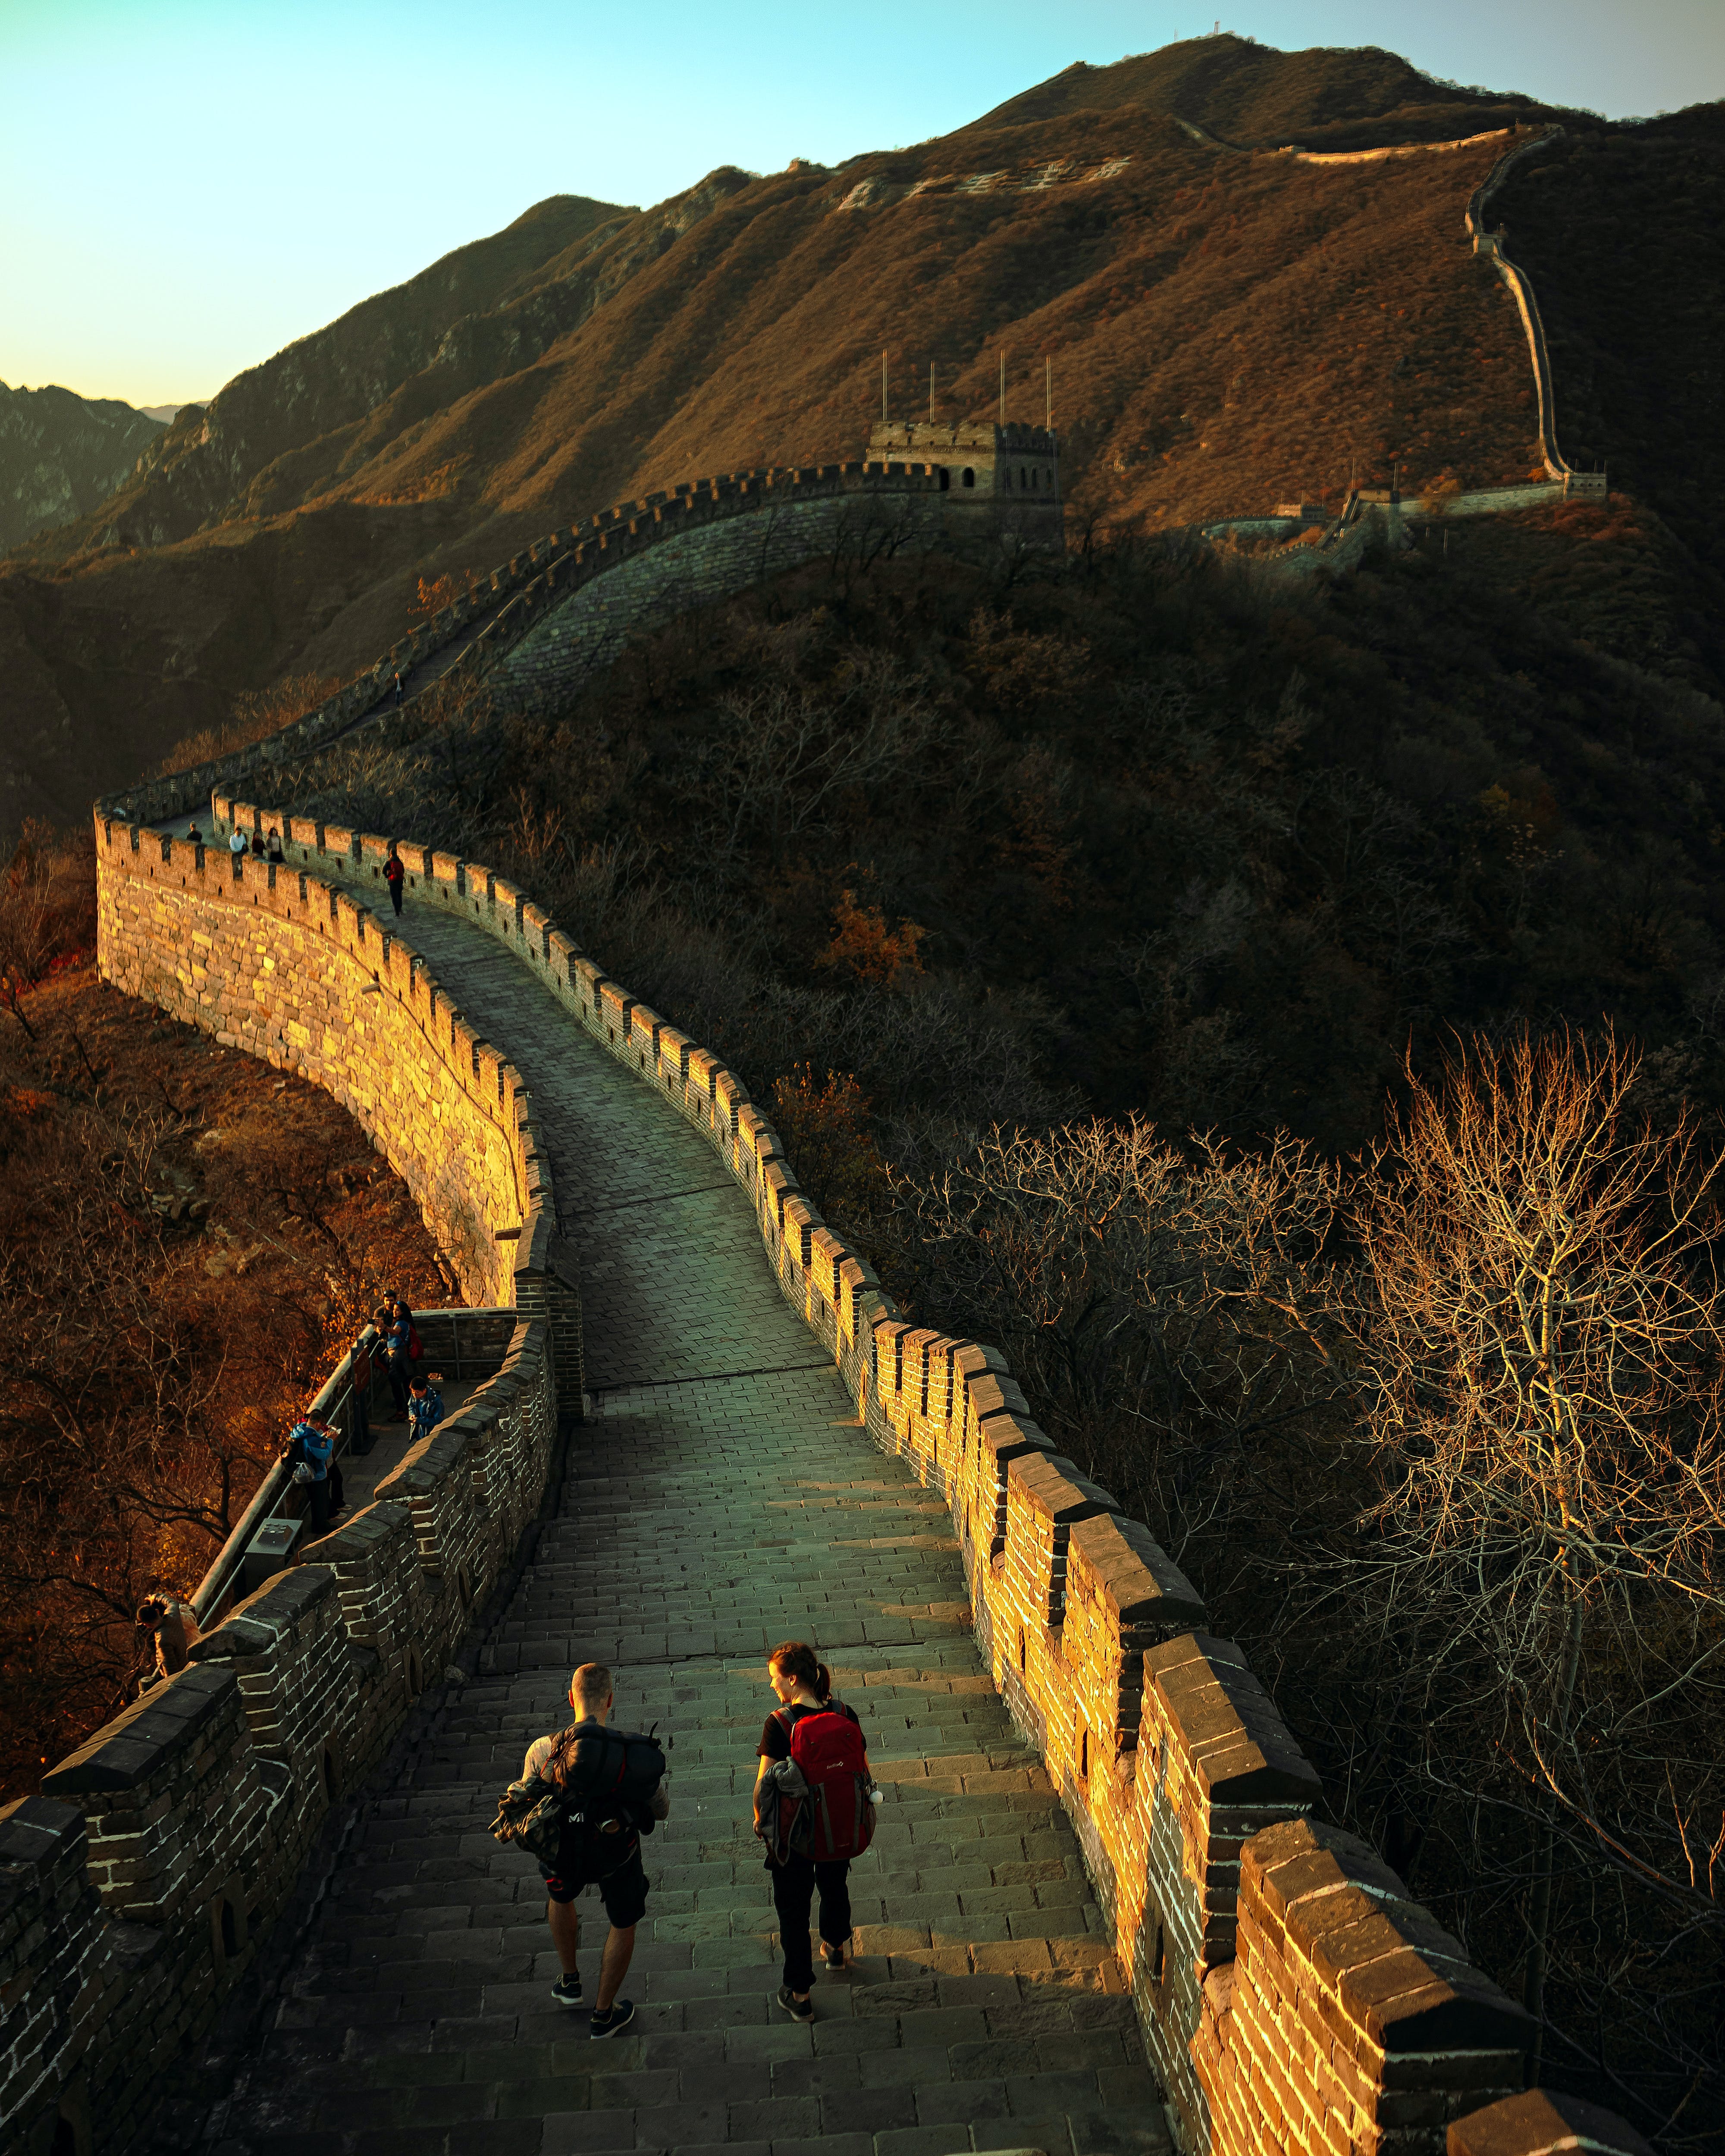 Tourists walking through the Great Wall of China | Source: Pexels